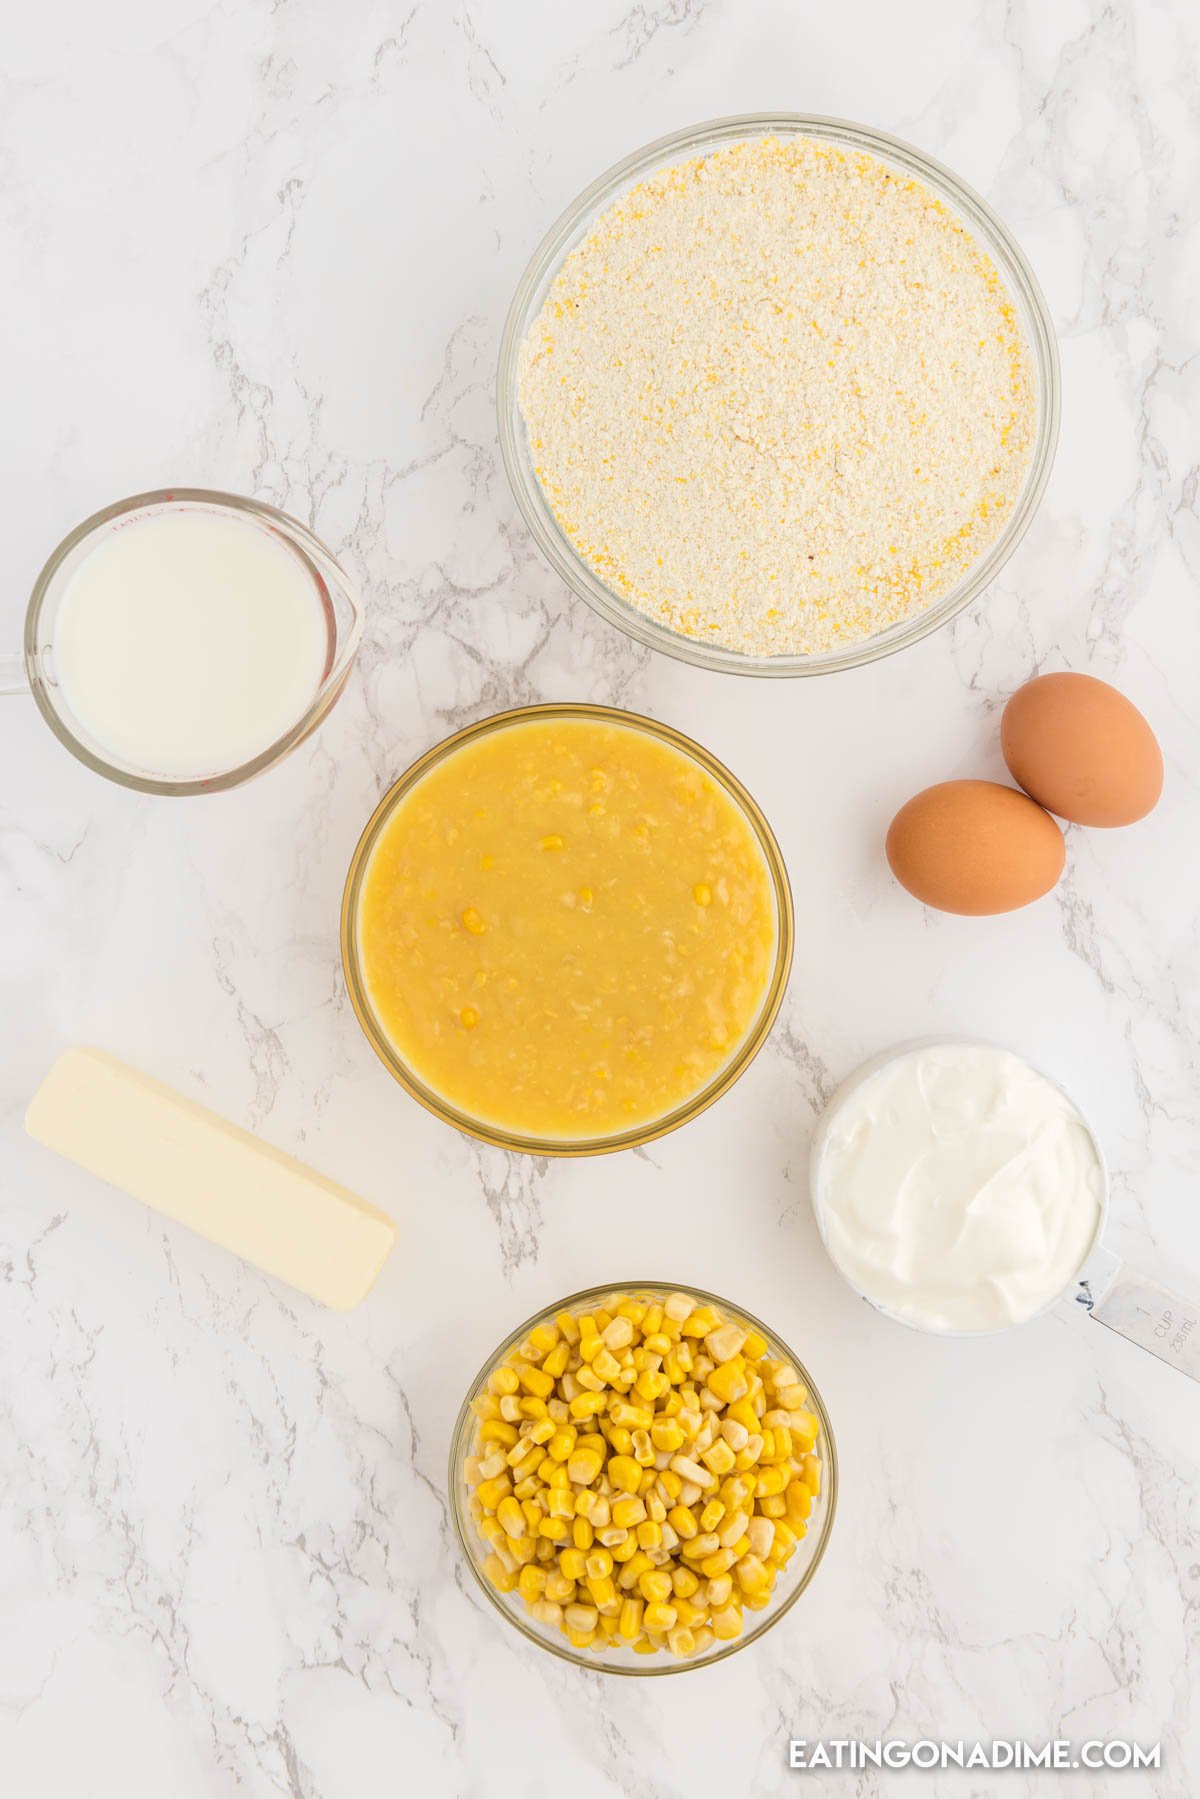 Ingredients needed - cornbread mix, cream style sweet corn, canned corn, salted butter, eggs, milk, sour cream